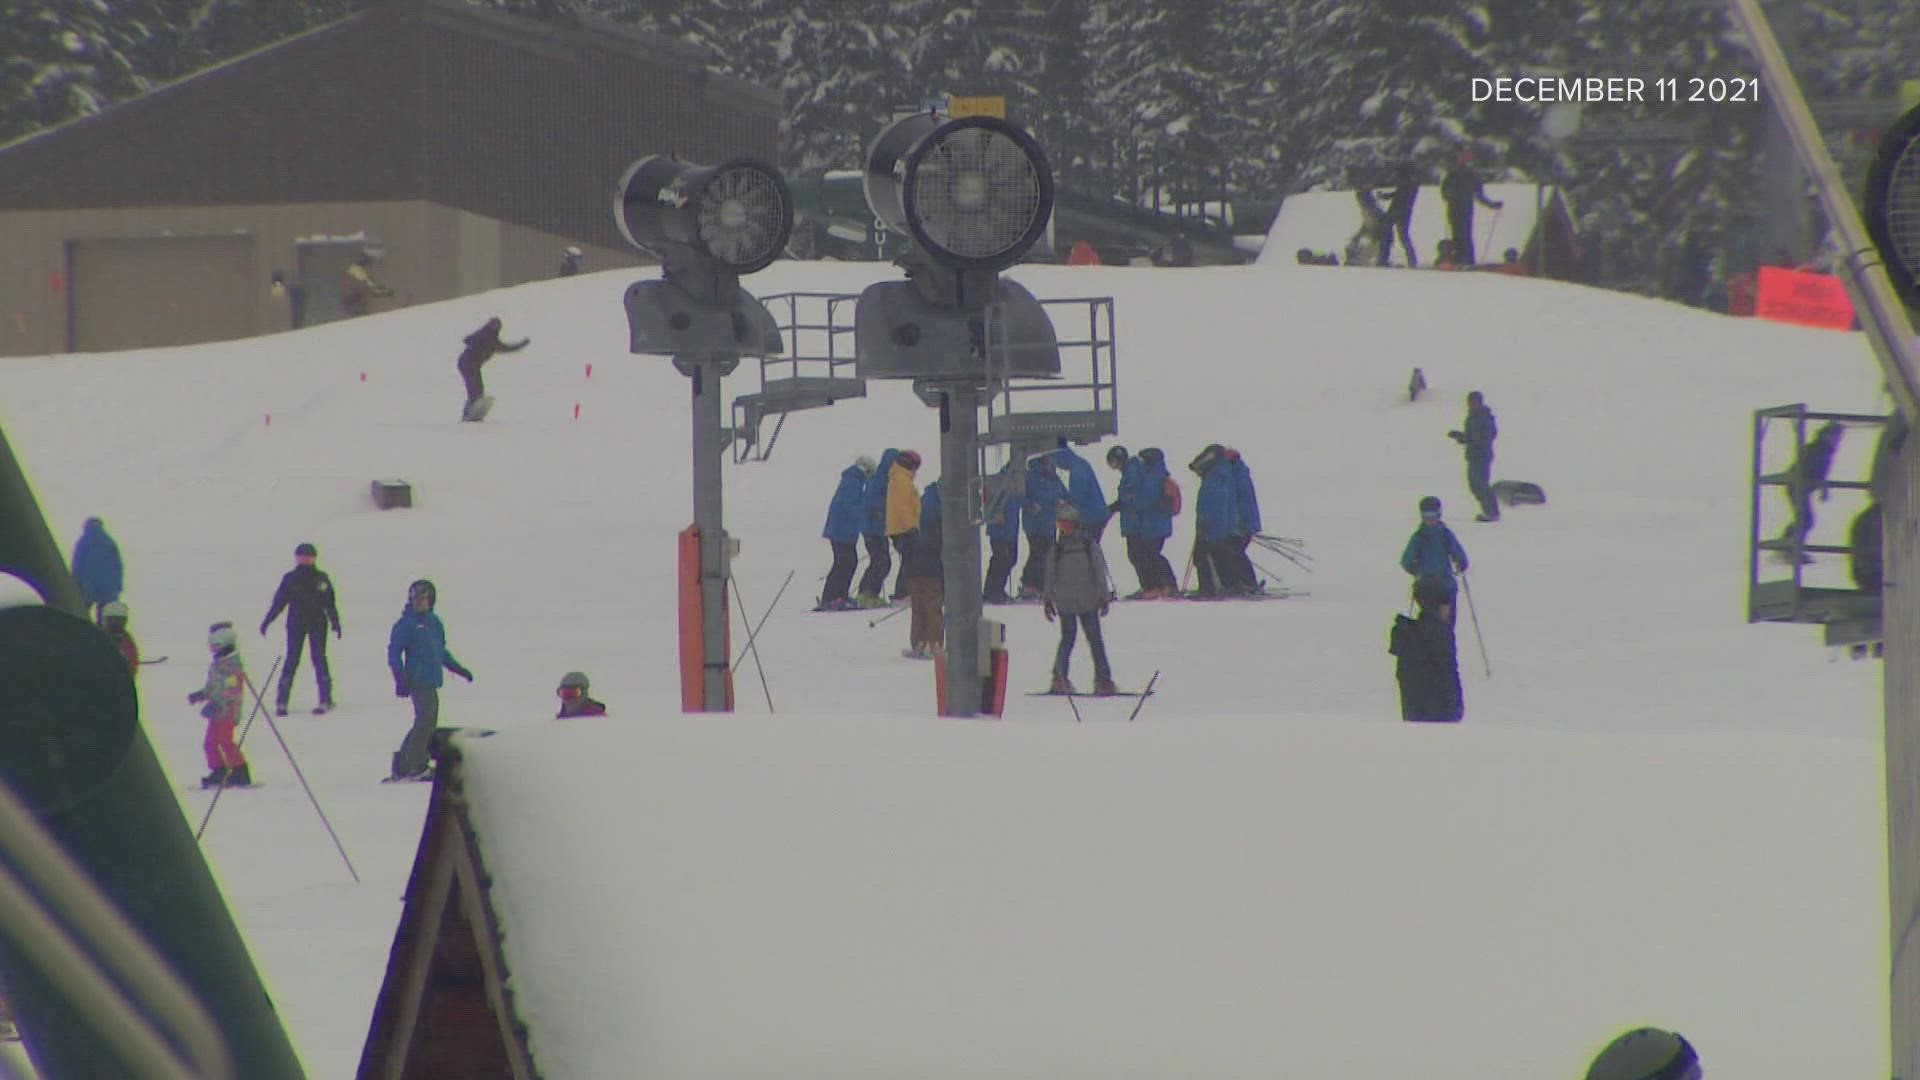 Early-season skiing can present additional dangers. Officials say bringing proper equipment and checking the forecast is critical.